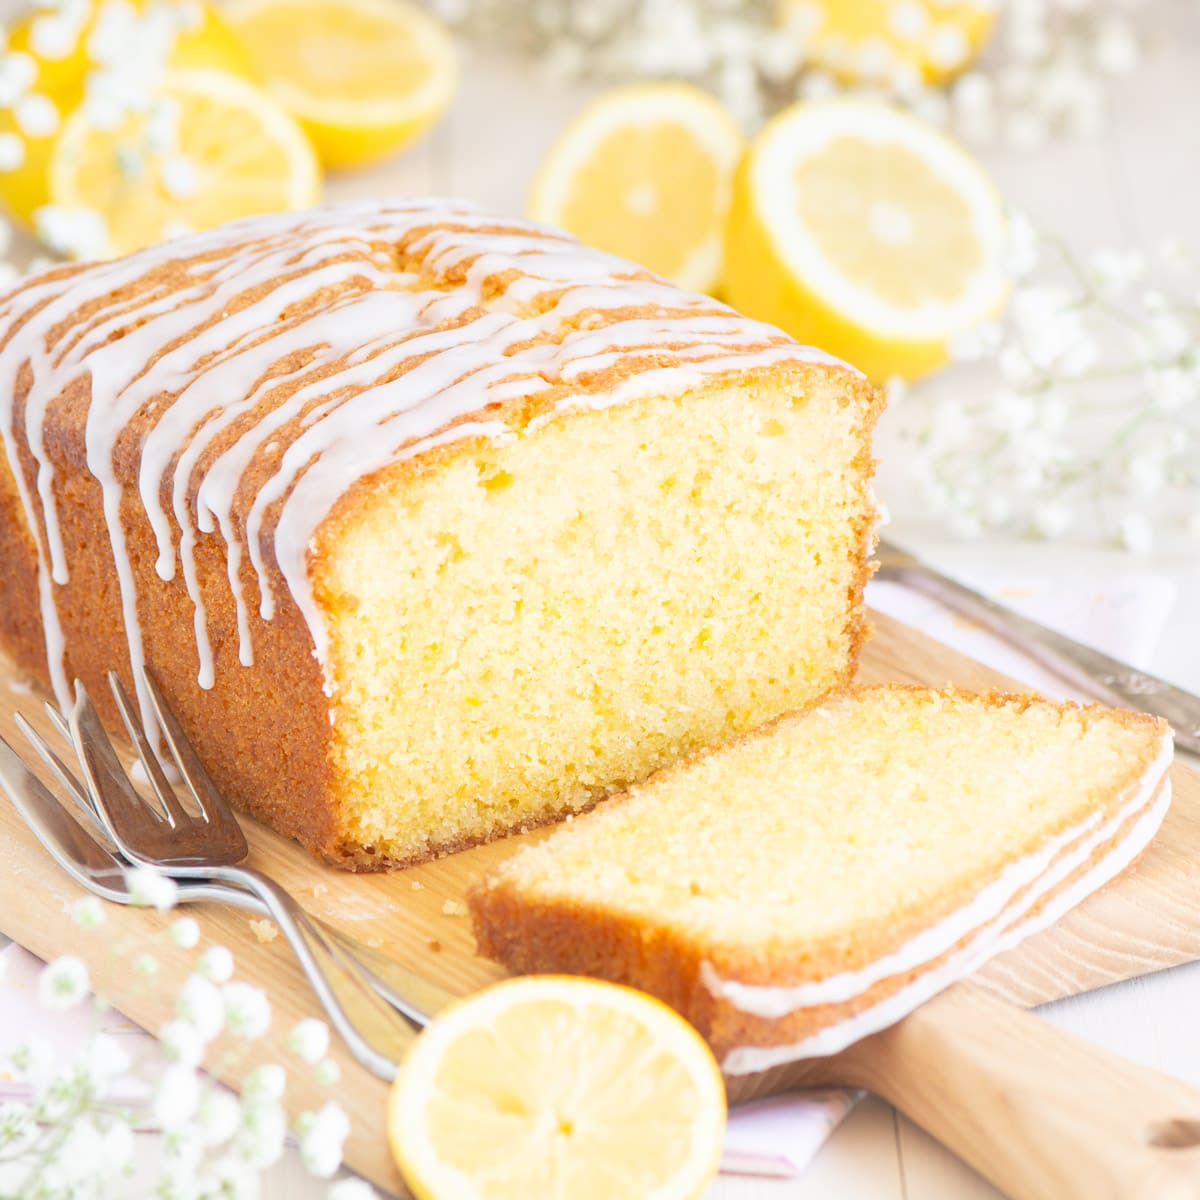 Lemon drizzle cake seen at eye level with one slice at the front of the shot and the inner crumb visible. 